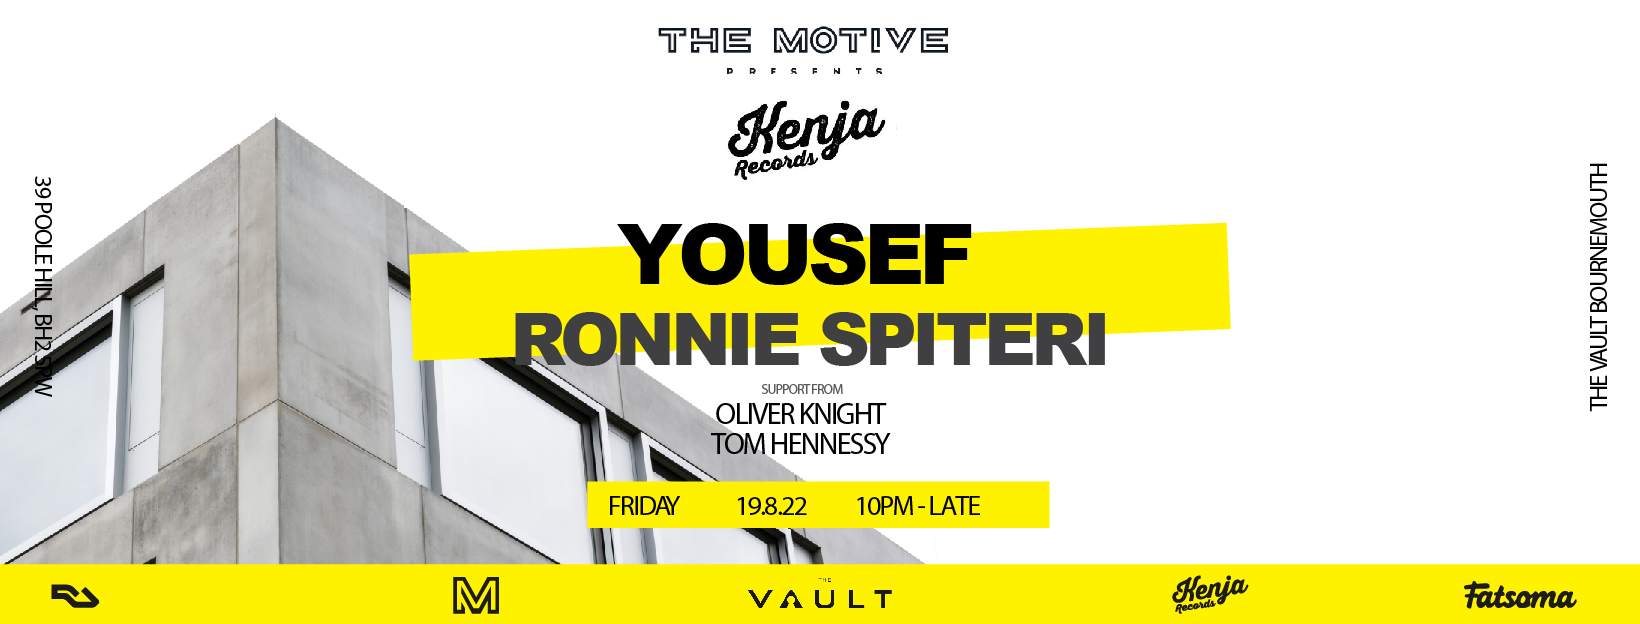 The Motive presents: Yousef (Circus) - Página frontal